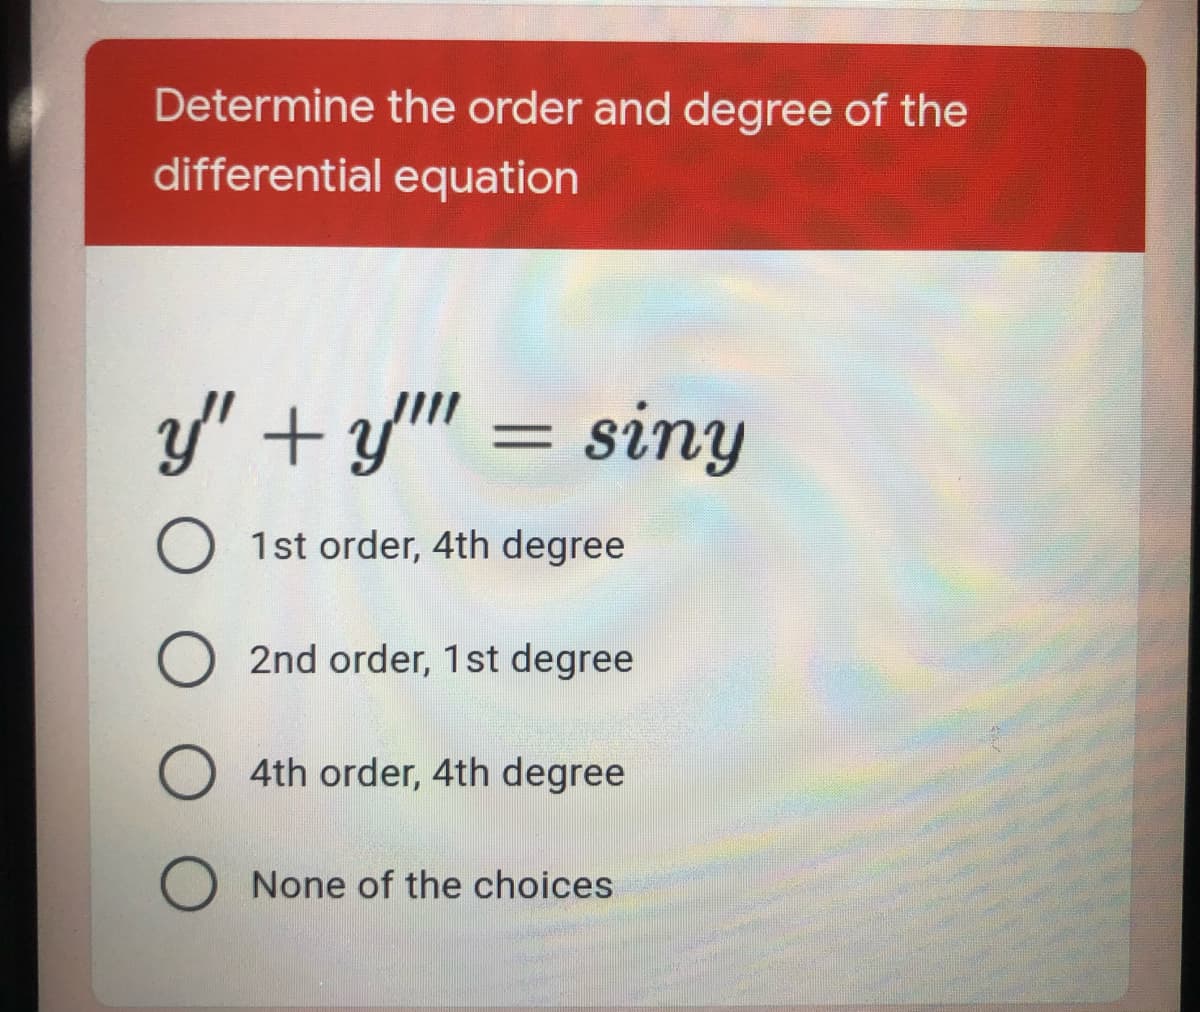 Determine the order and degree of the
differential equation
y" +y" = siny
O 1st order, 4th degree
O 2nd order, 1st degree
4th order, 4th degree
O None of the choices
